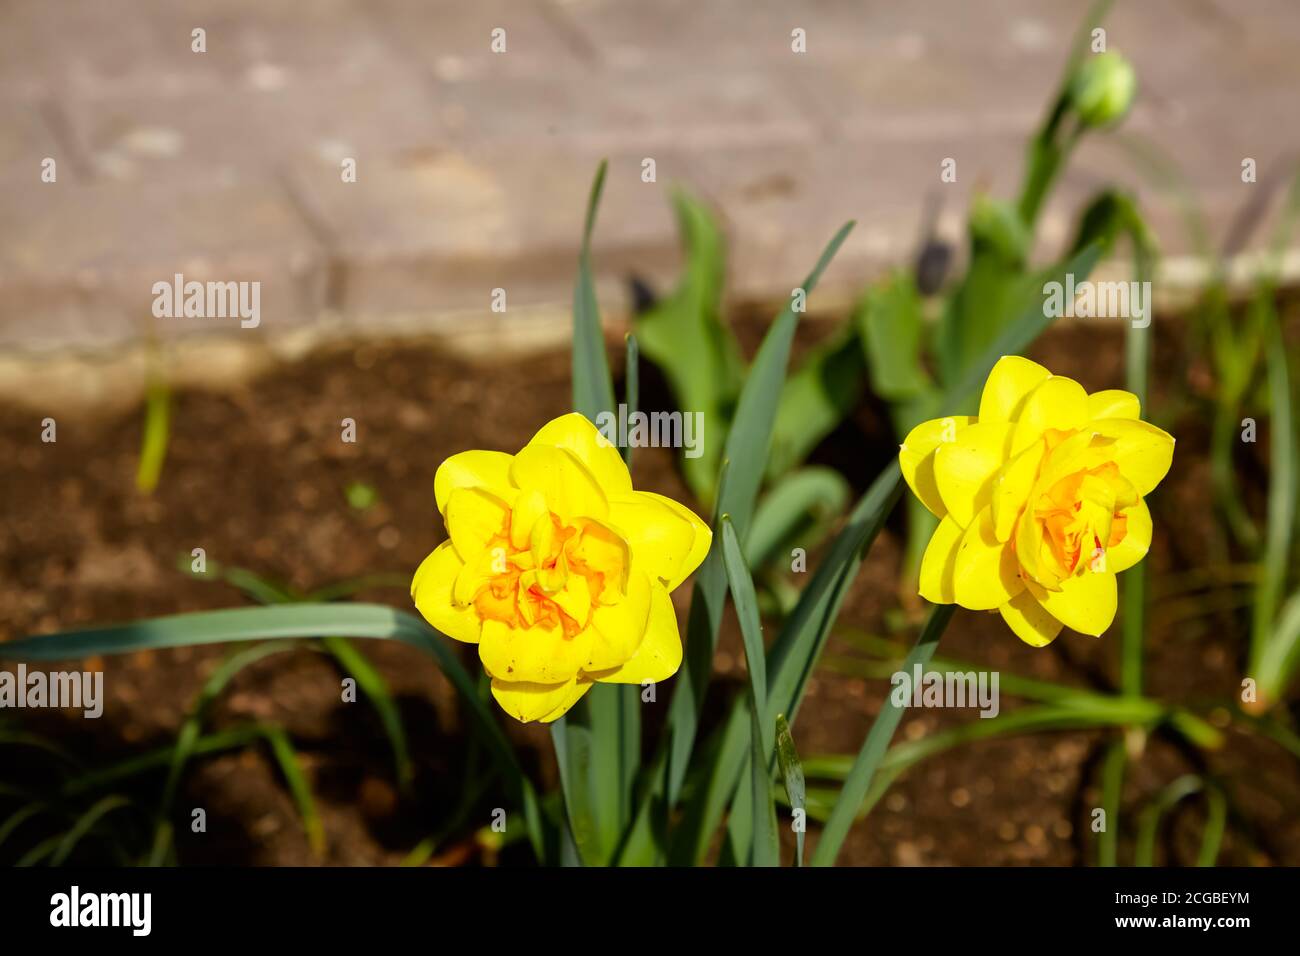 Yellow daffodils bloom in the garden. Stock Photo